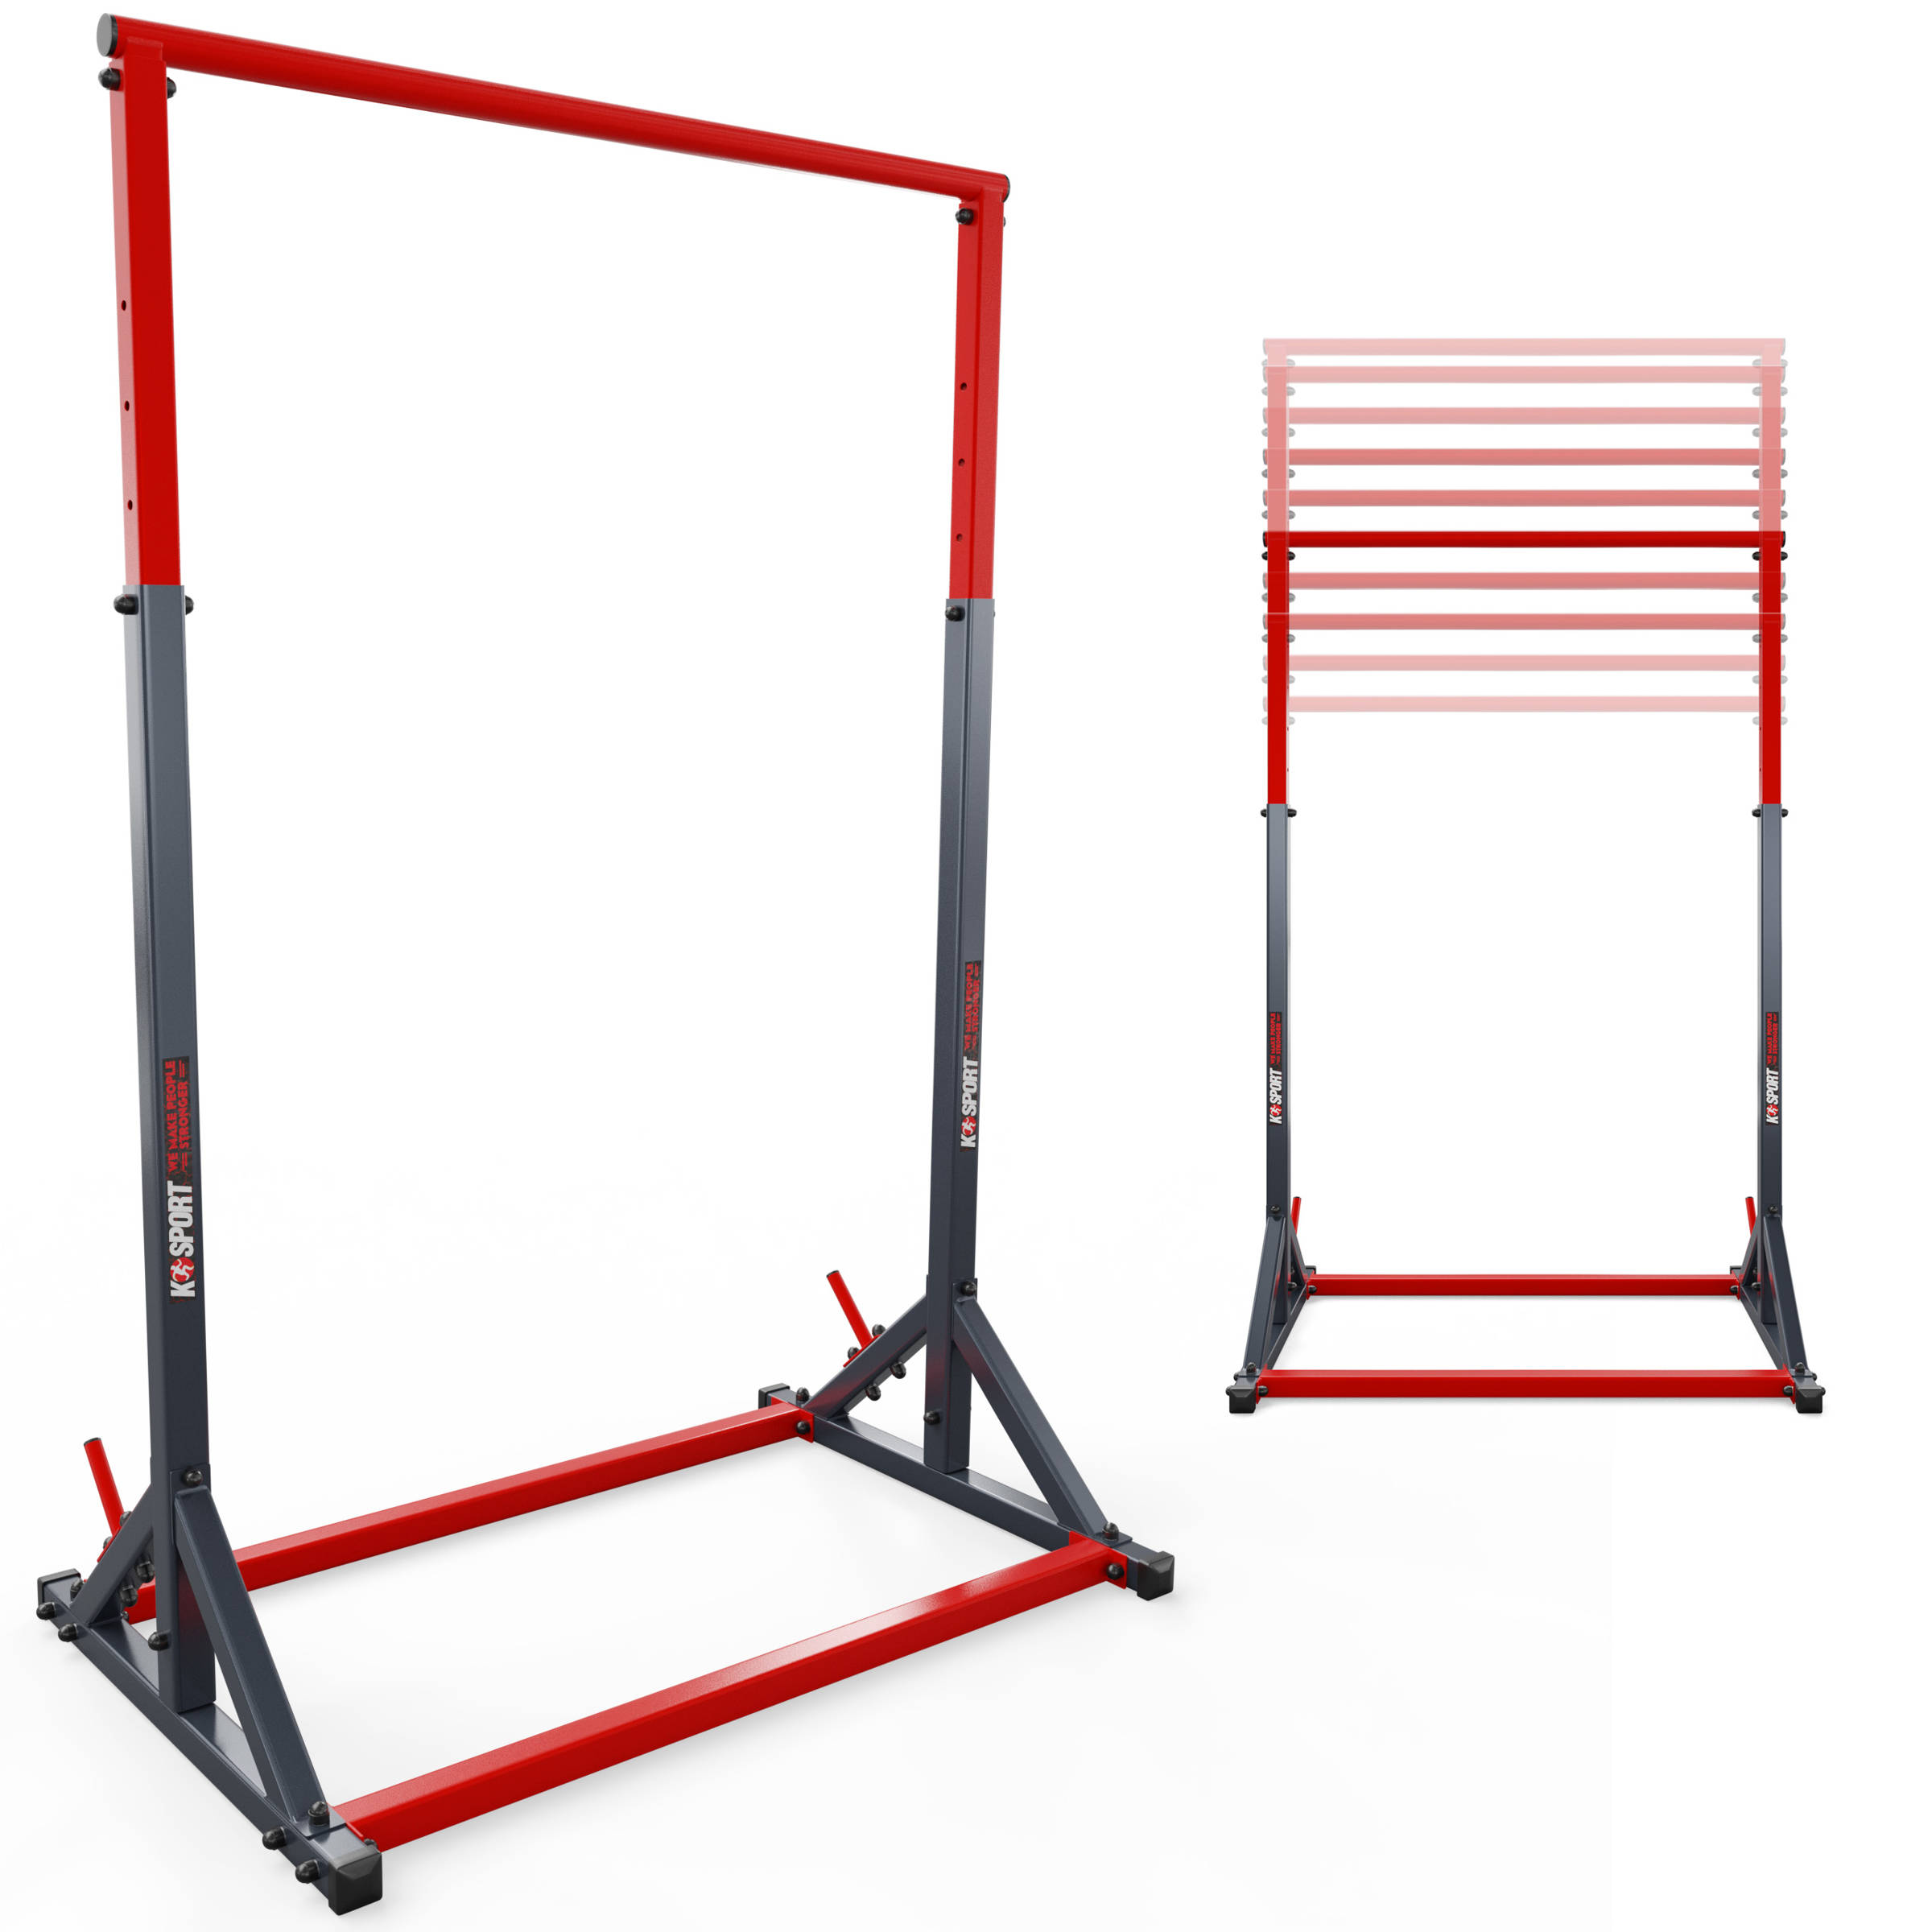 Stand Alone Portable Pull Up Bar | K-Sport UK